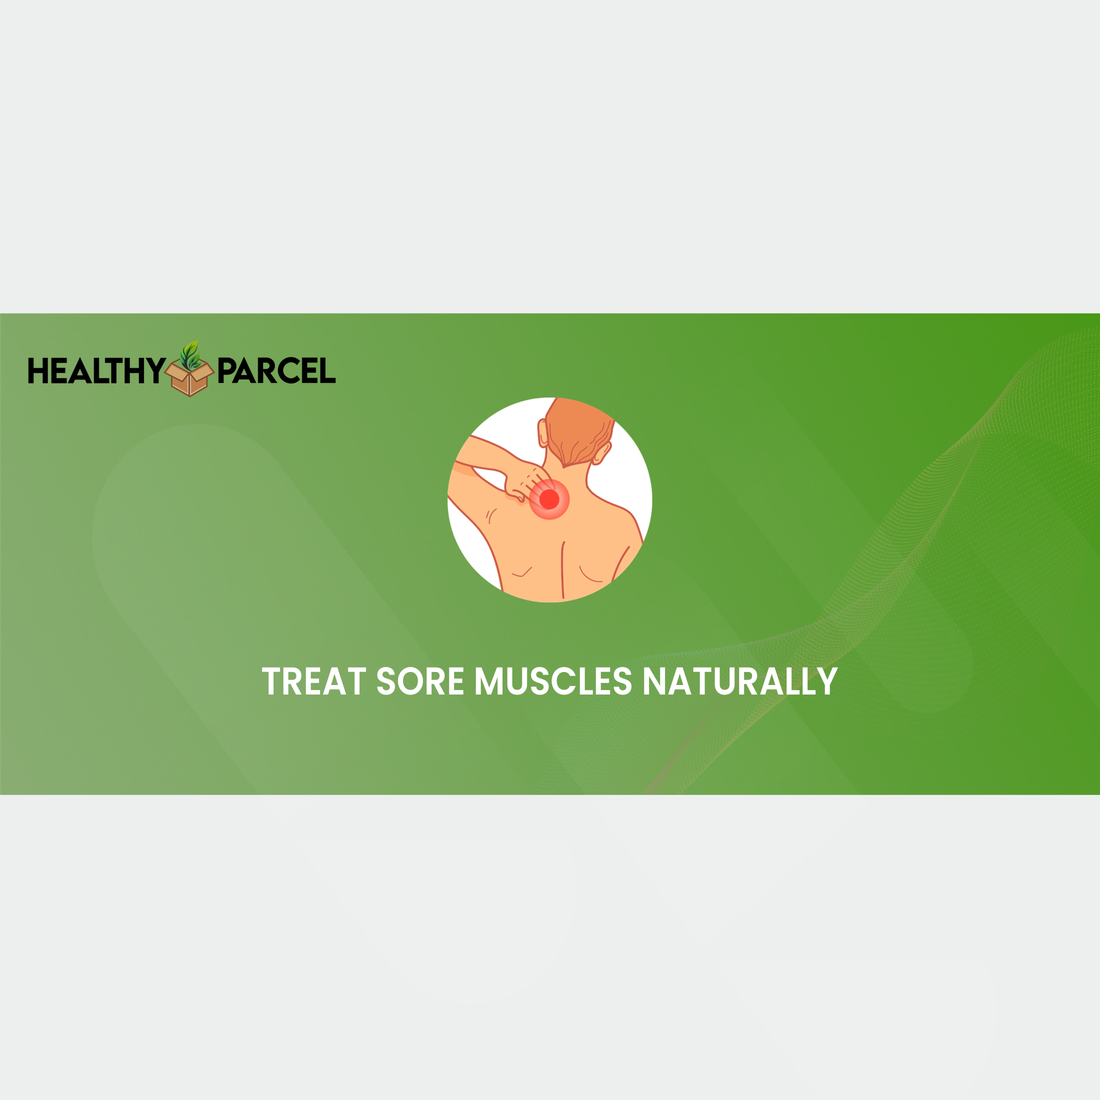 Treat Sore Muscles Naturally